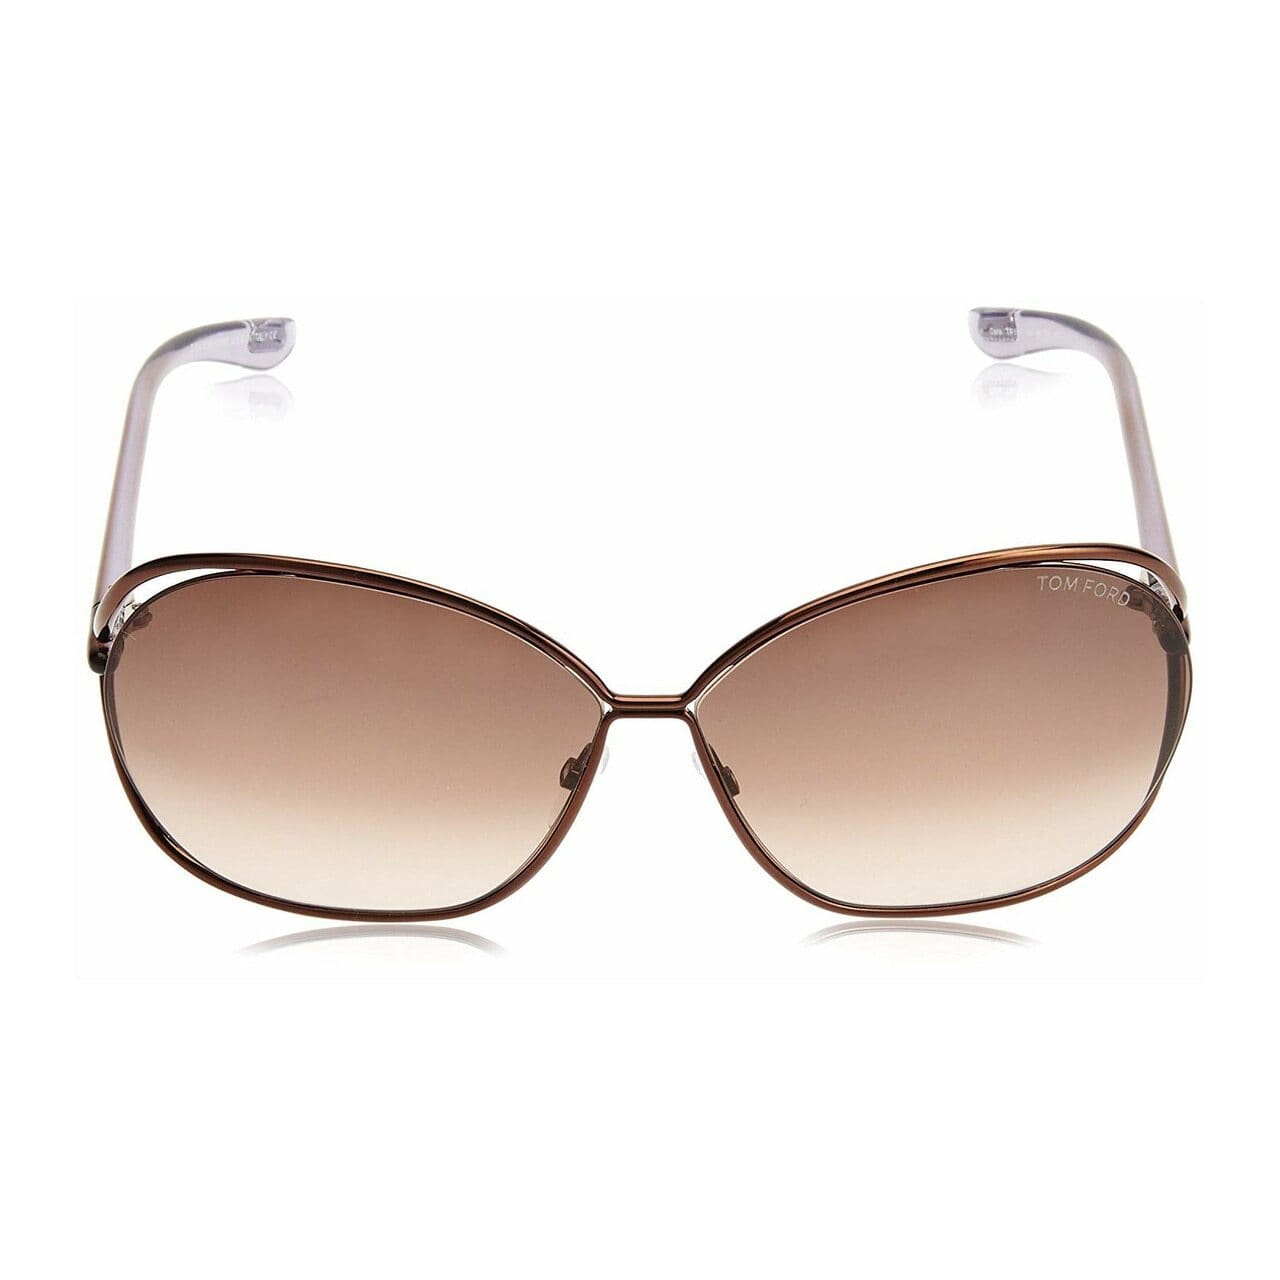 Tom Ford TF157-48F Carla Shiny Brown Oversize Soft Square Gradient Brown Women's Sunglasses 664689468423